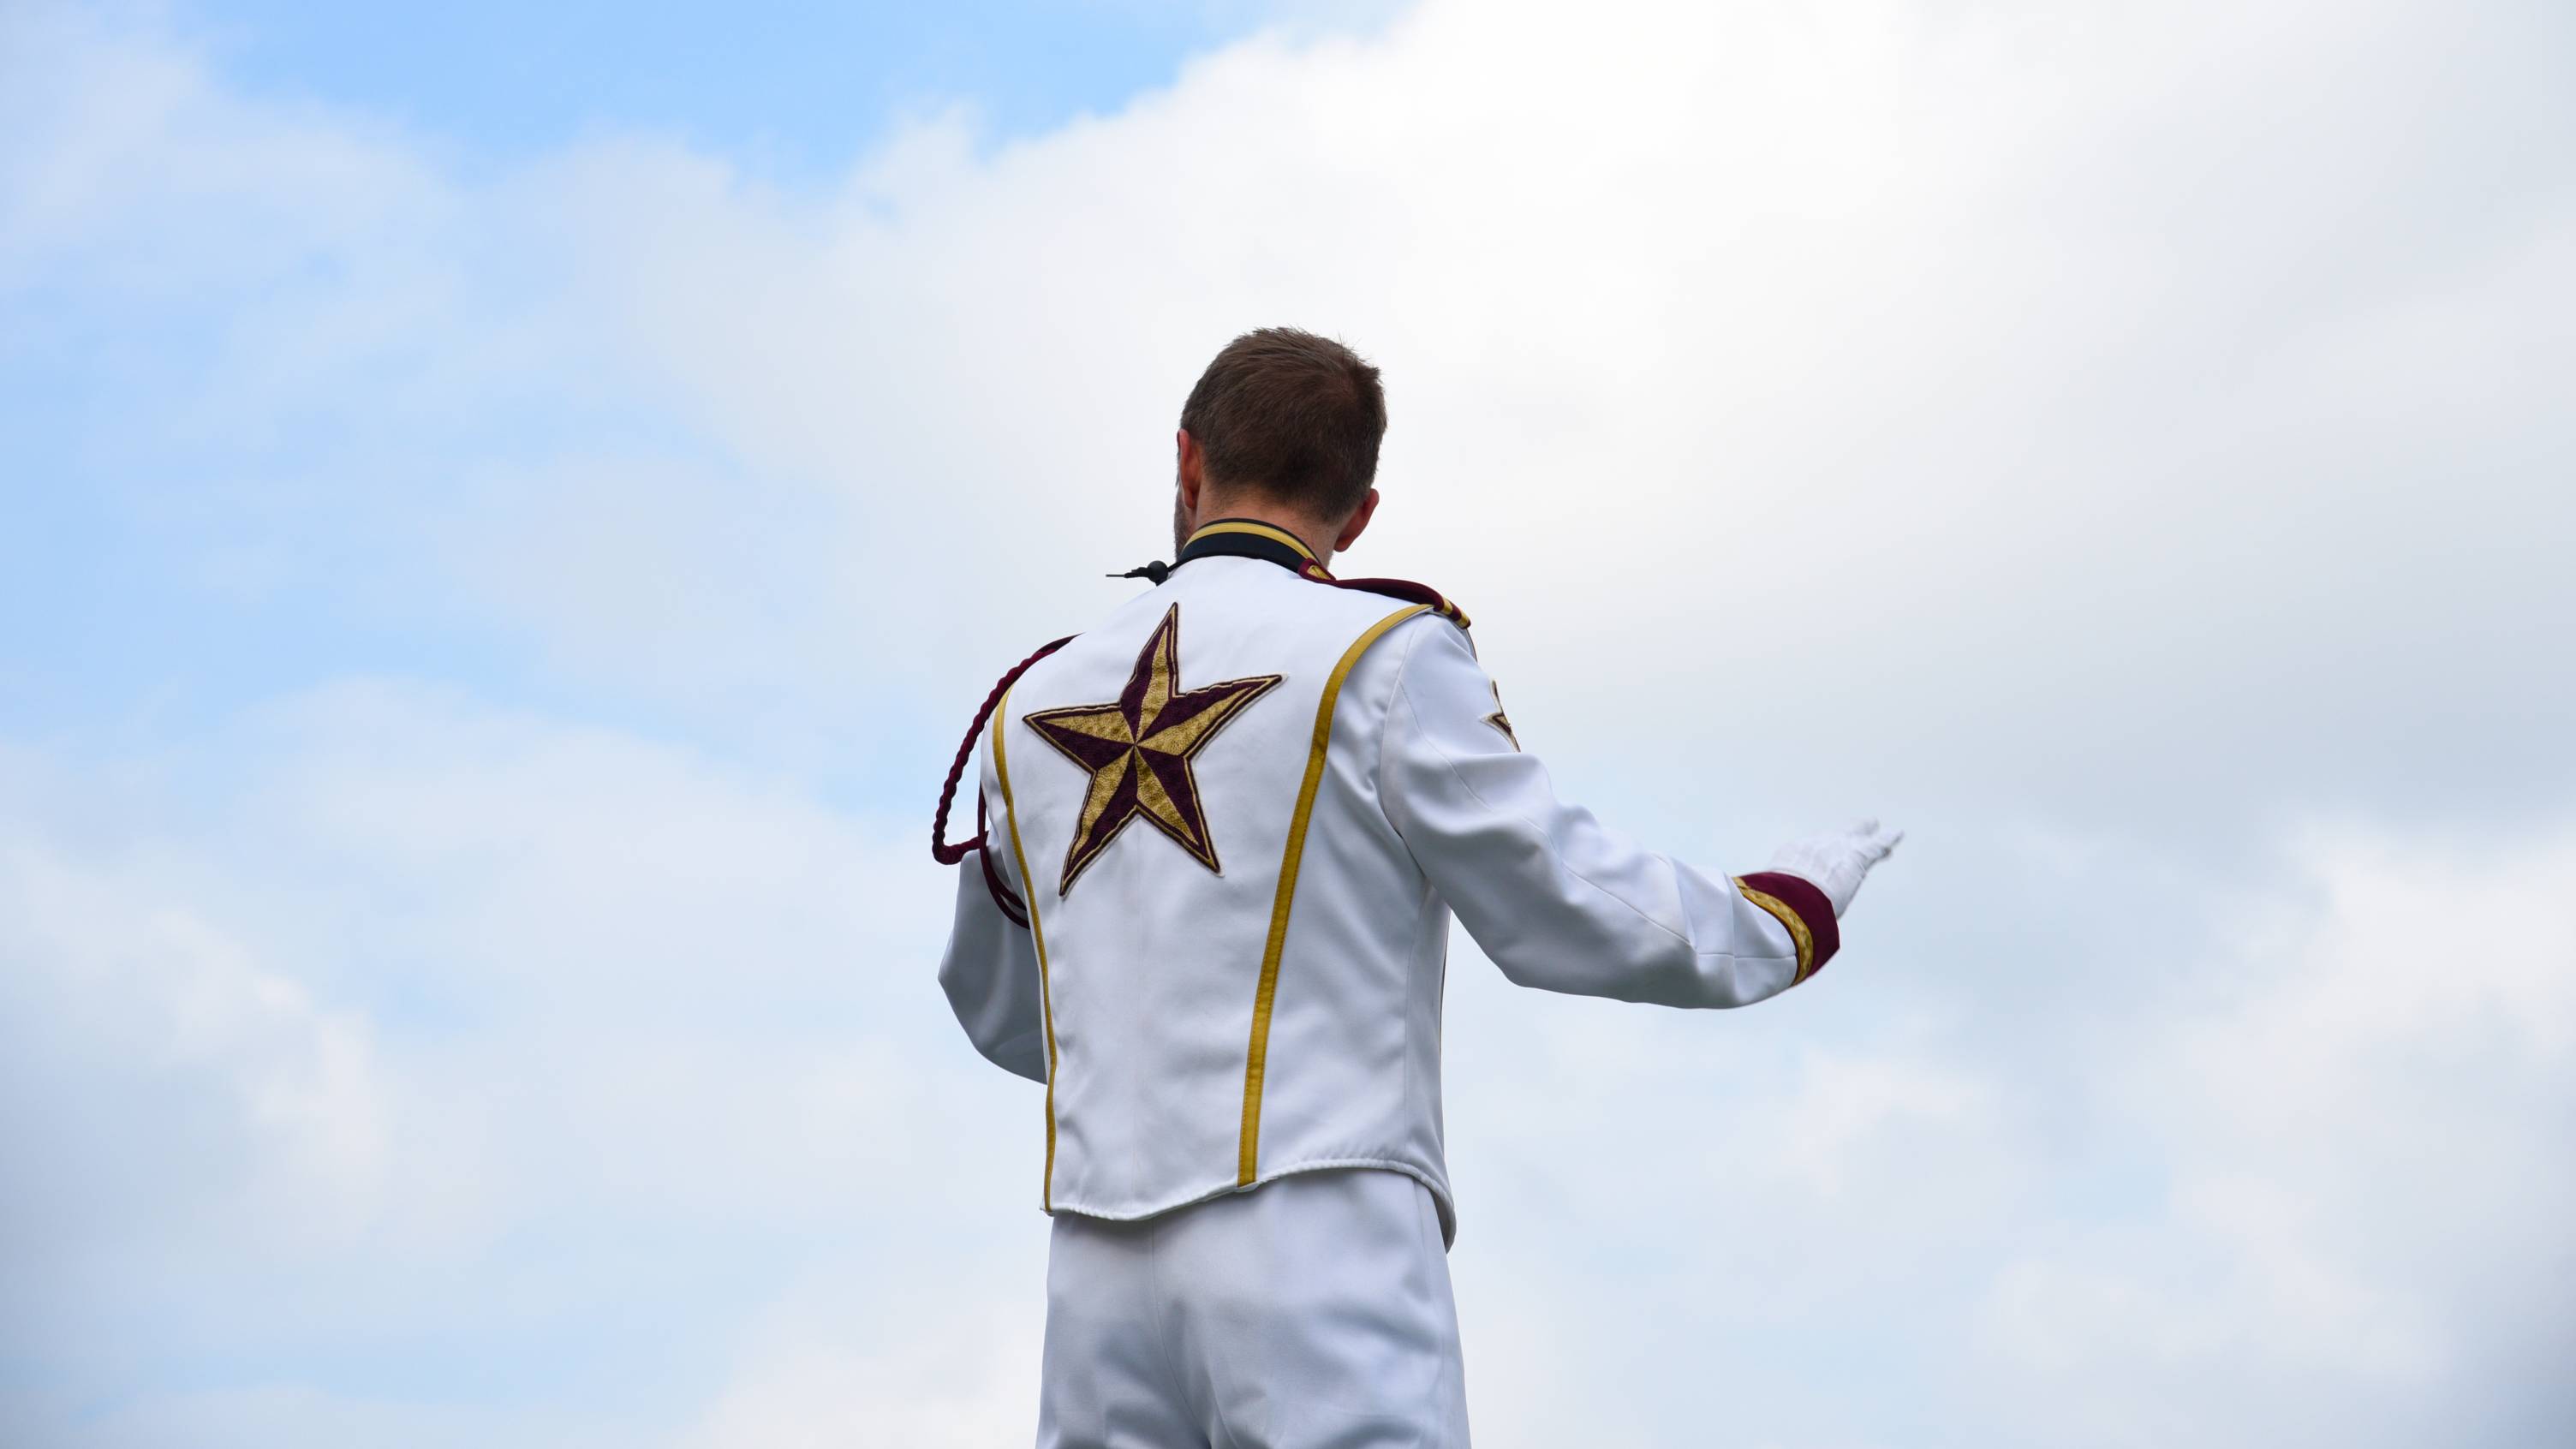 Drum major conducting in front of a cloud.